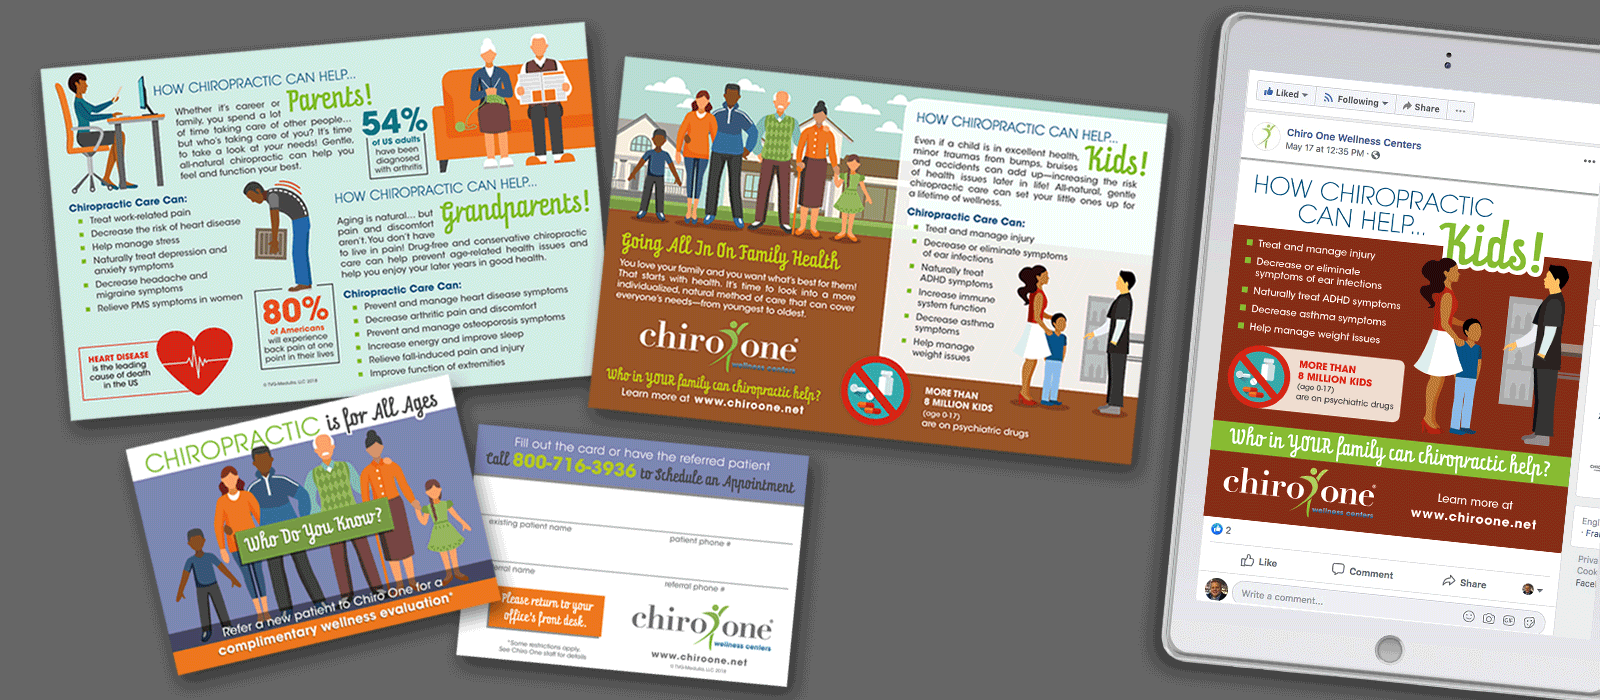 Chiro One - Chiropractic Can Help Info Graphic Card